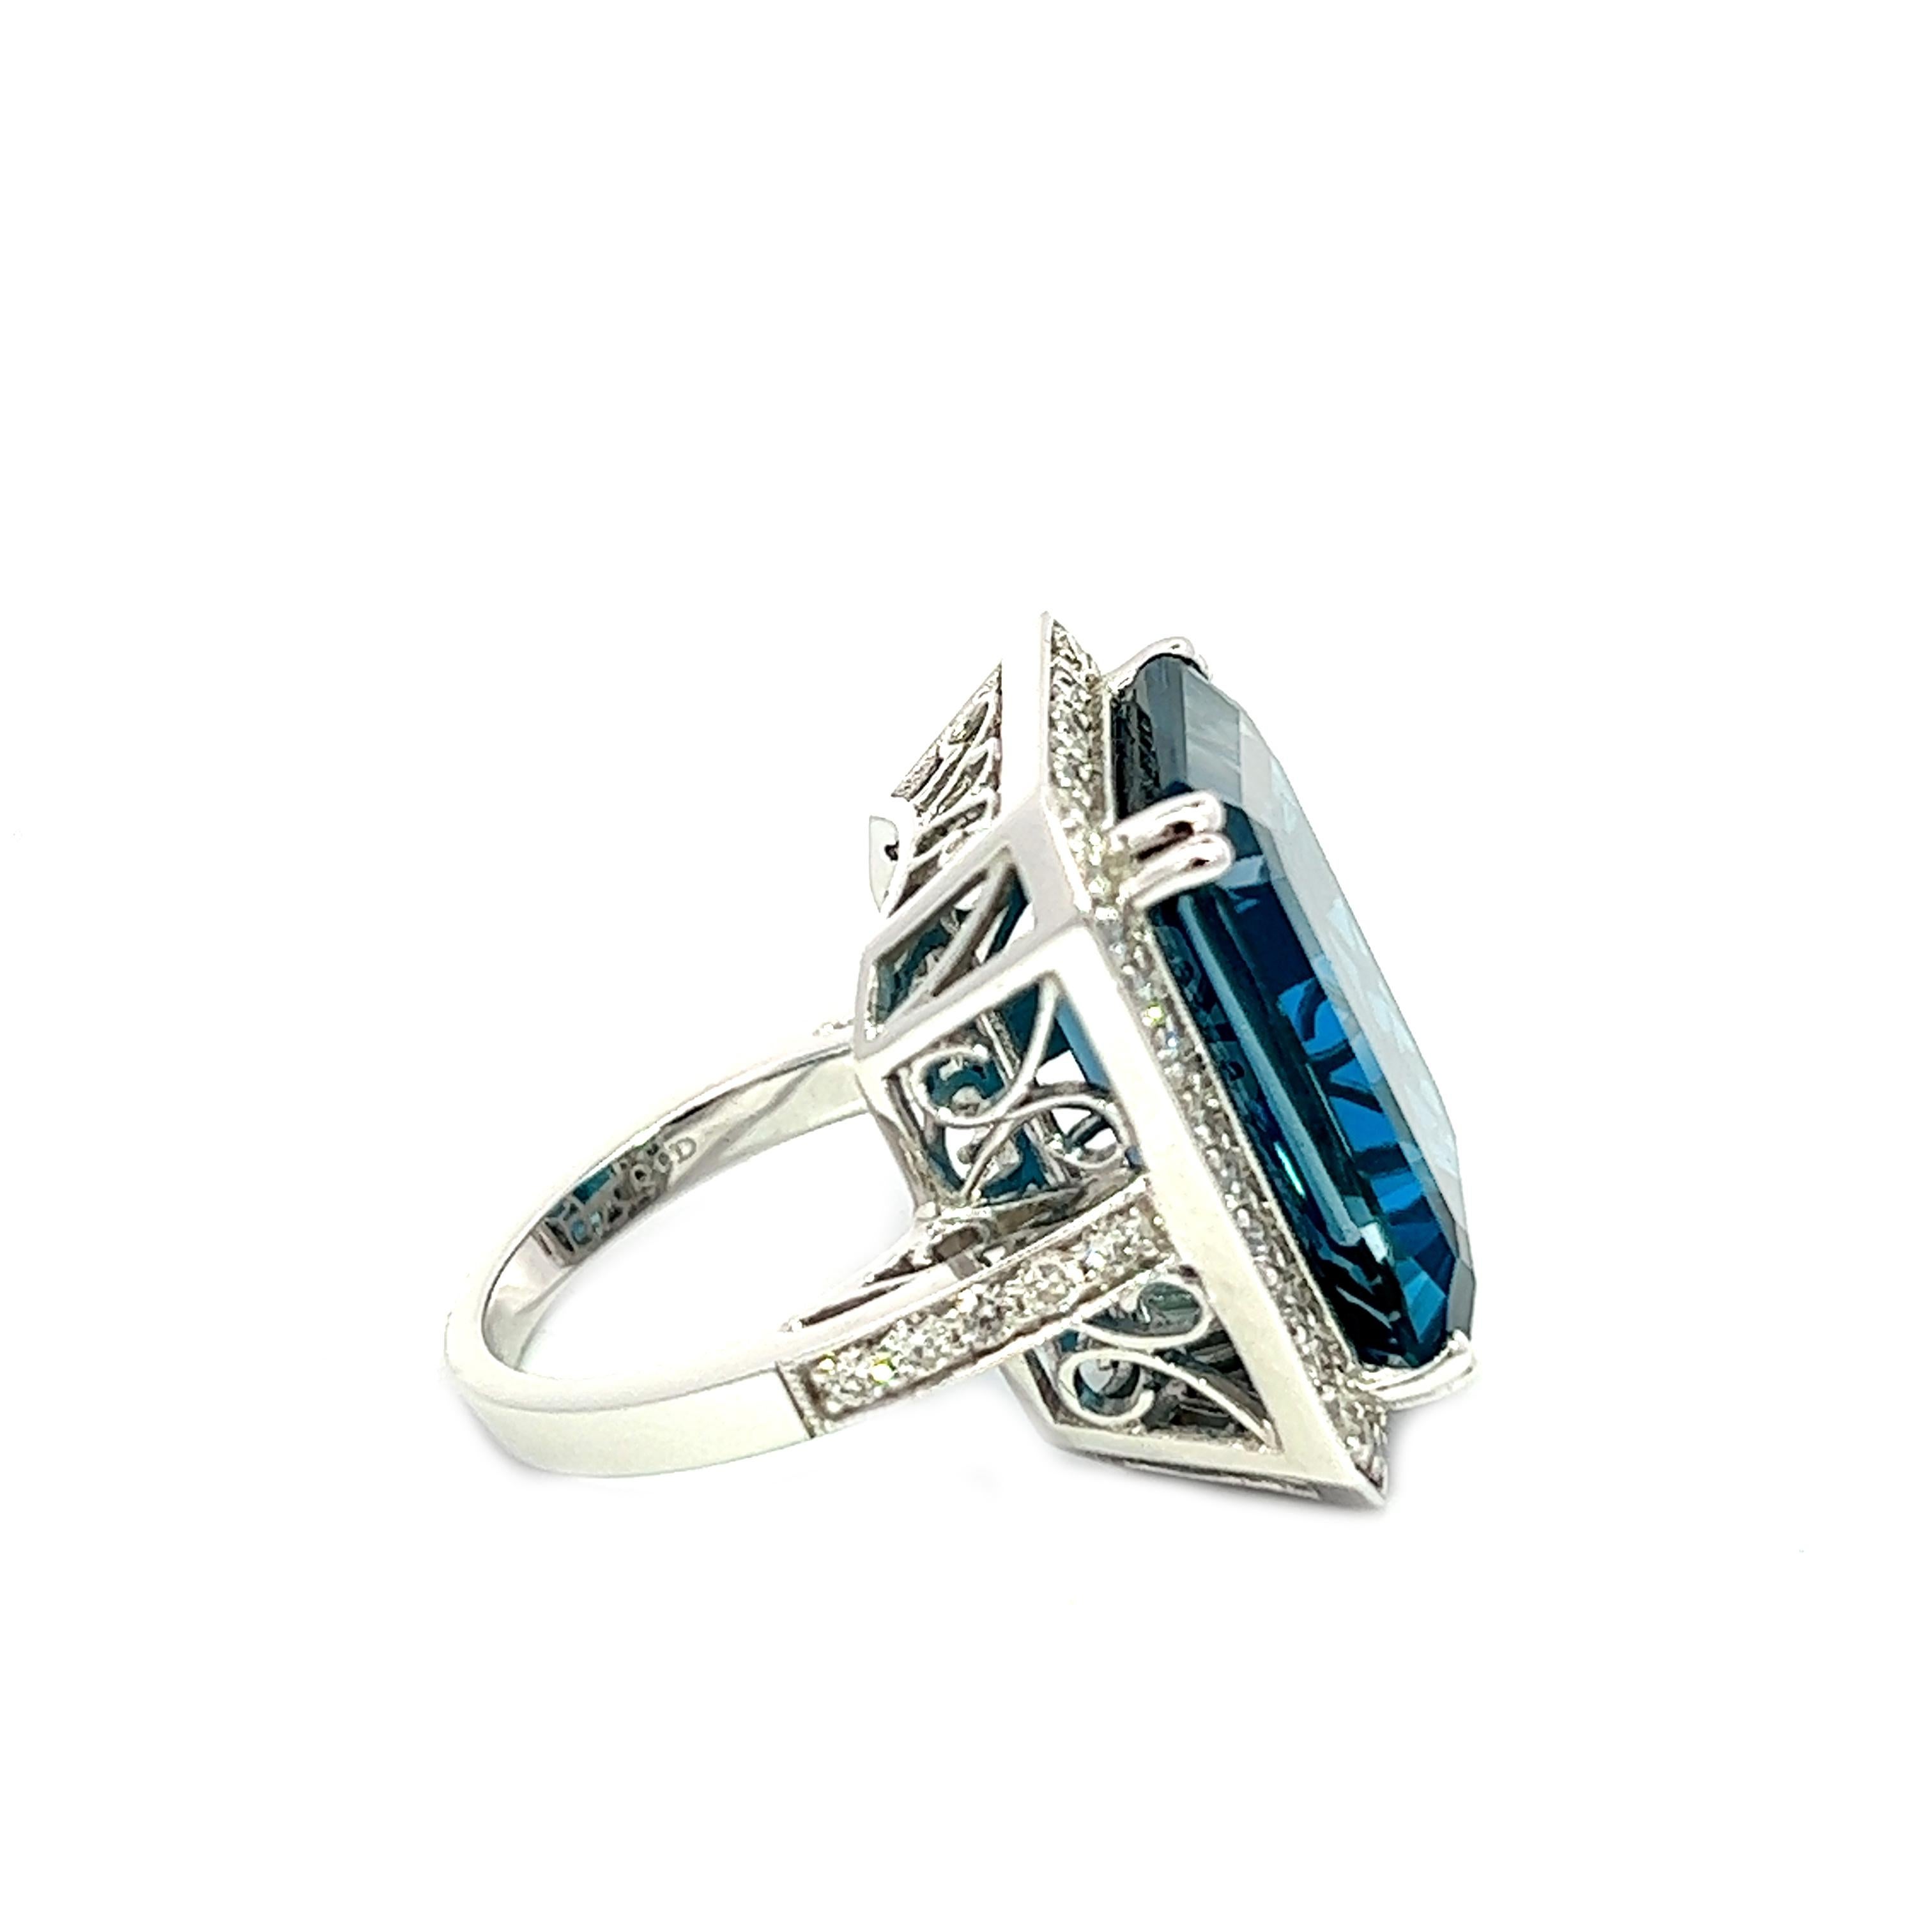 Emerald Cut 28.17CT Total Weight London Blue Topaz & Diamonds Ring, set in 14KW For Sale